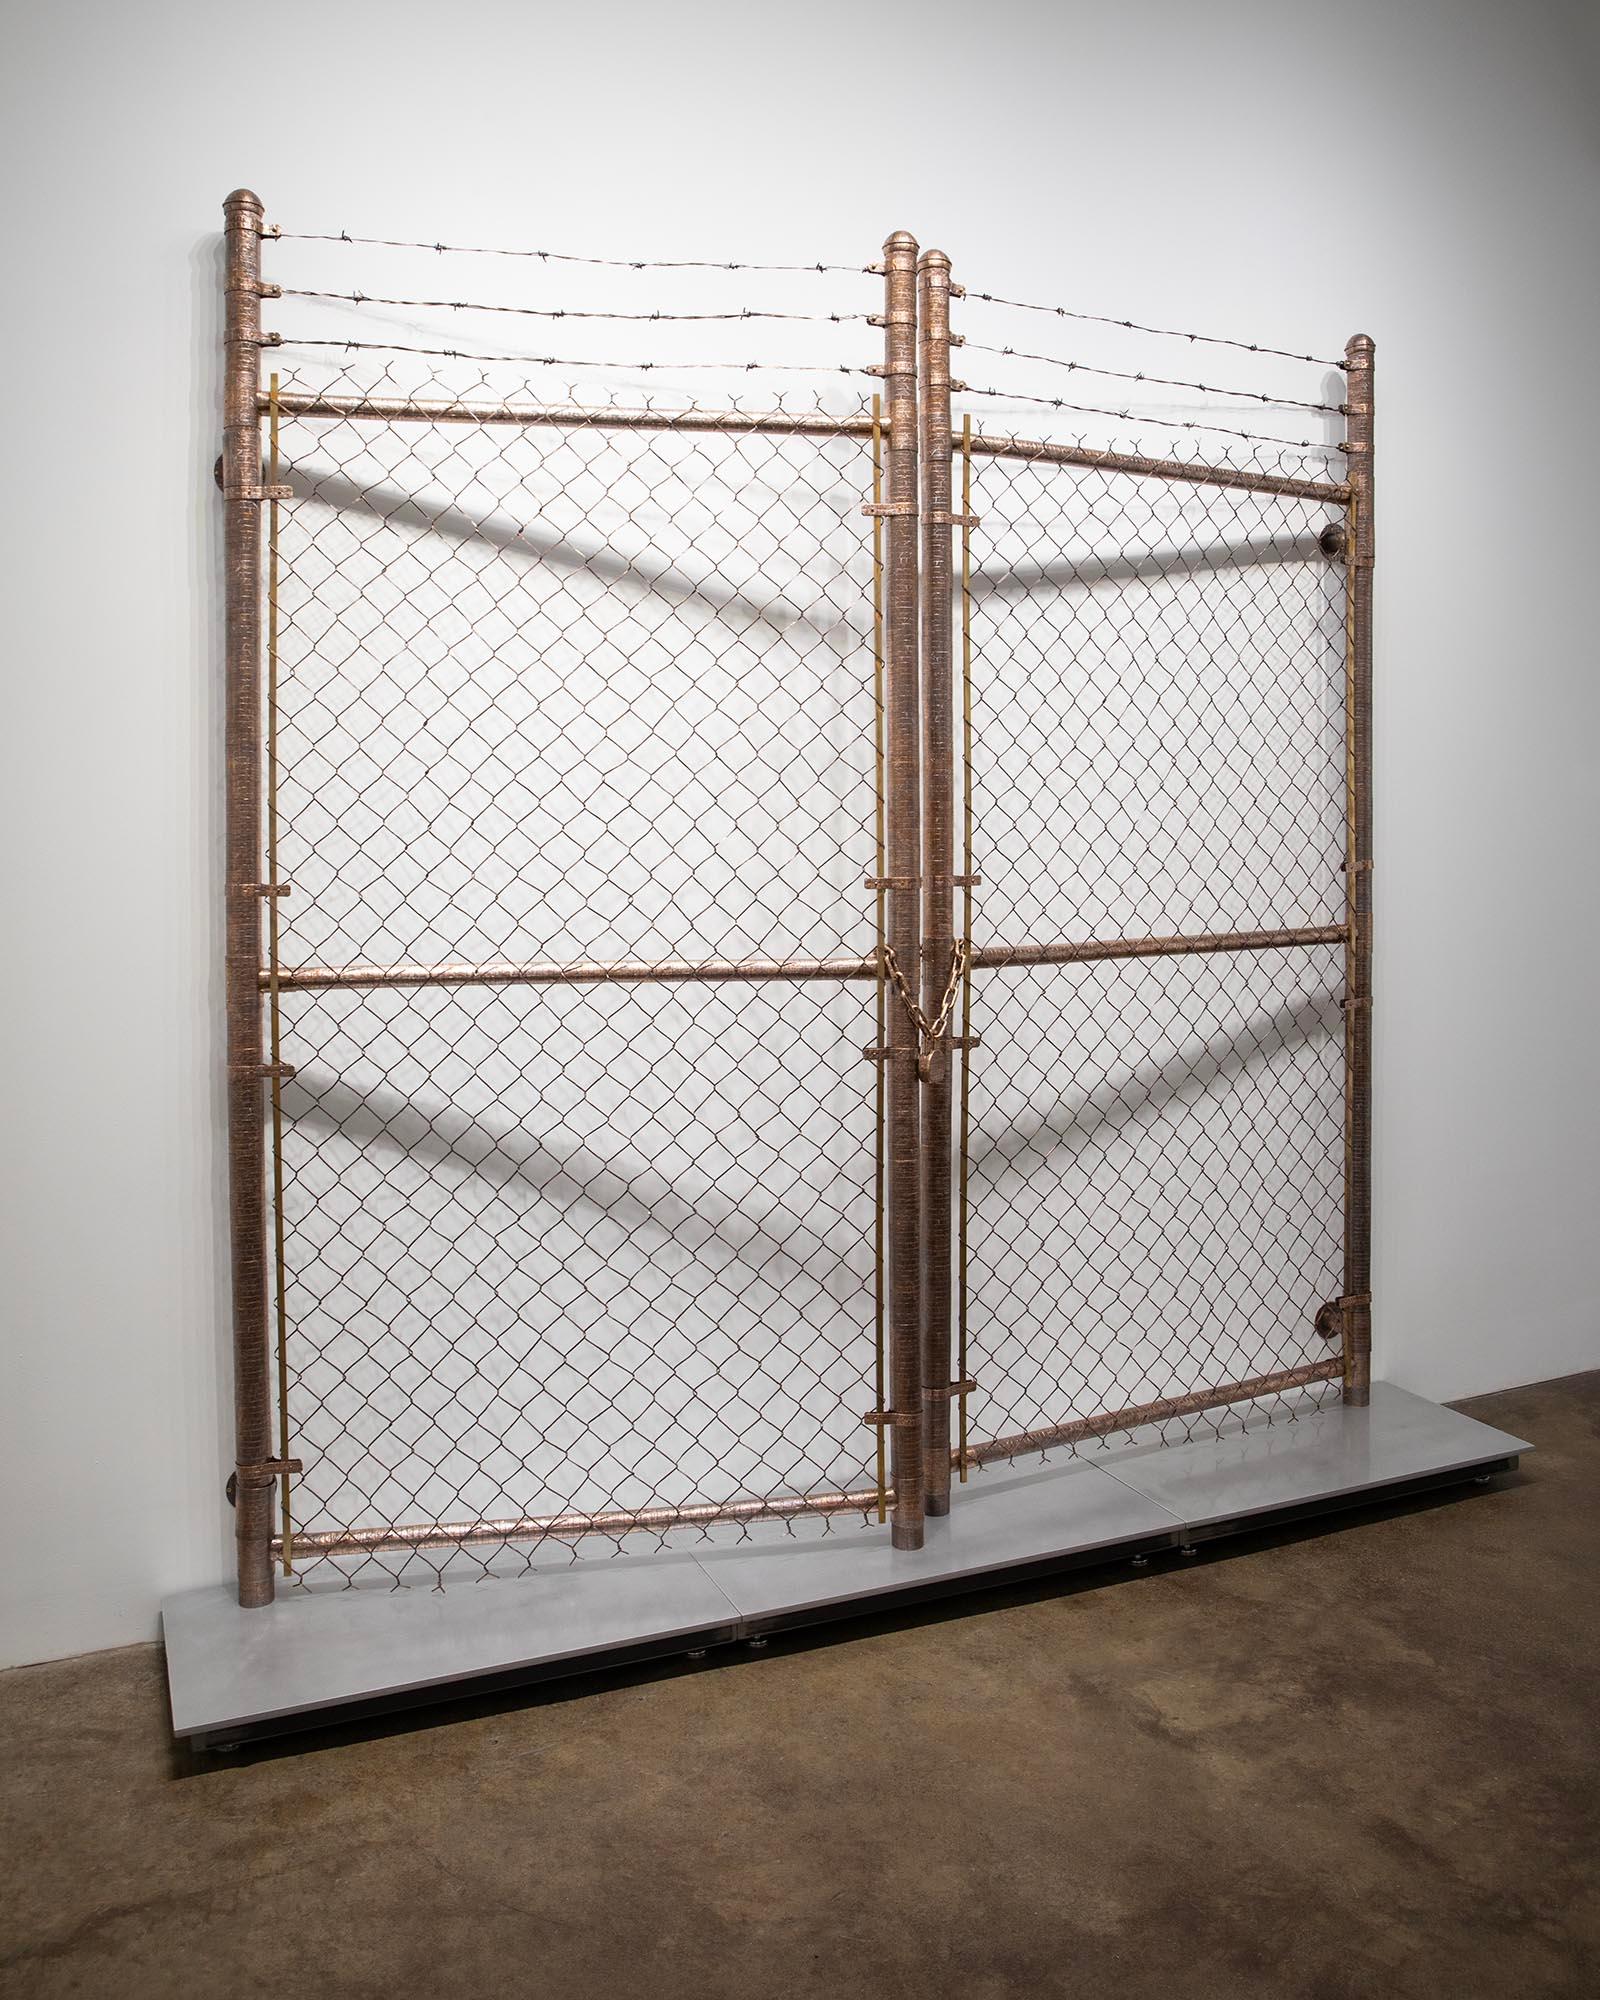 GOD BLESS AMERICA: CHAINLINK - Contemporary Sculpture by Stacey Lee Webber